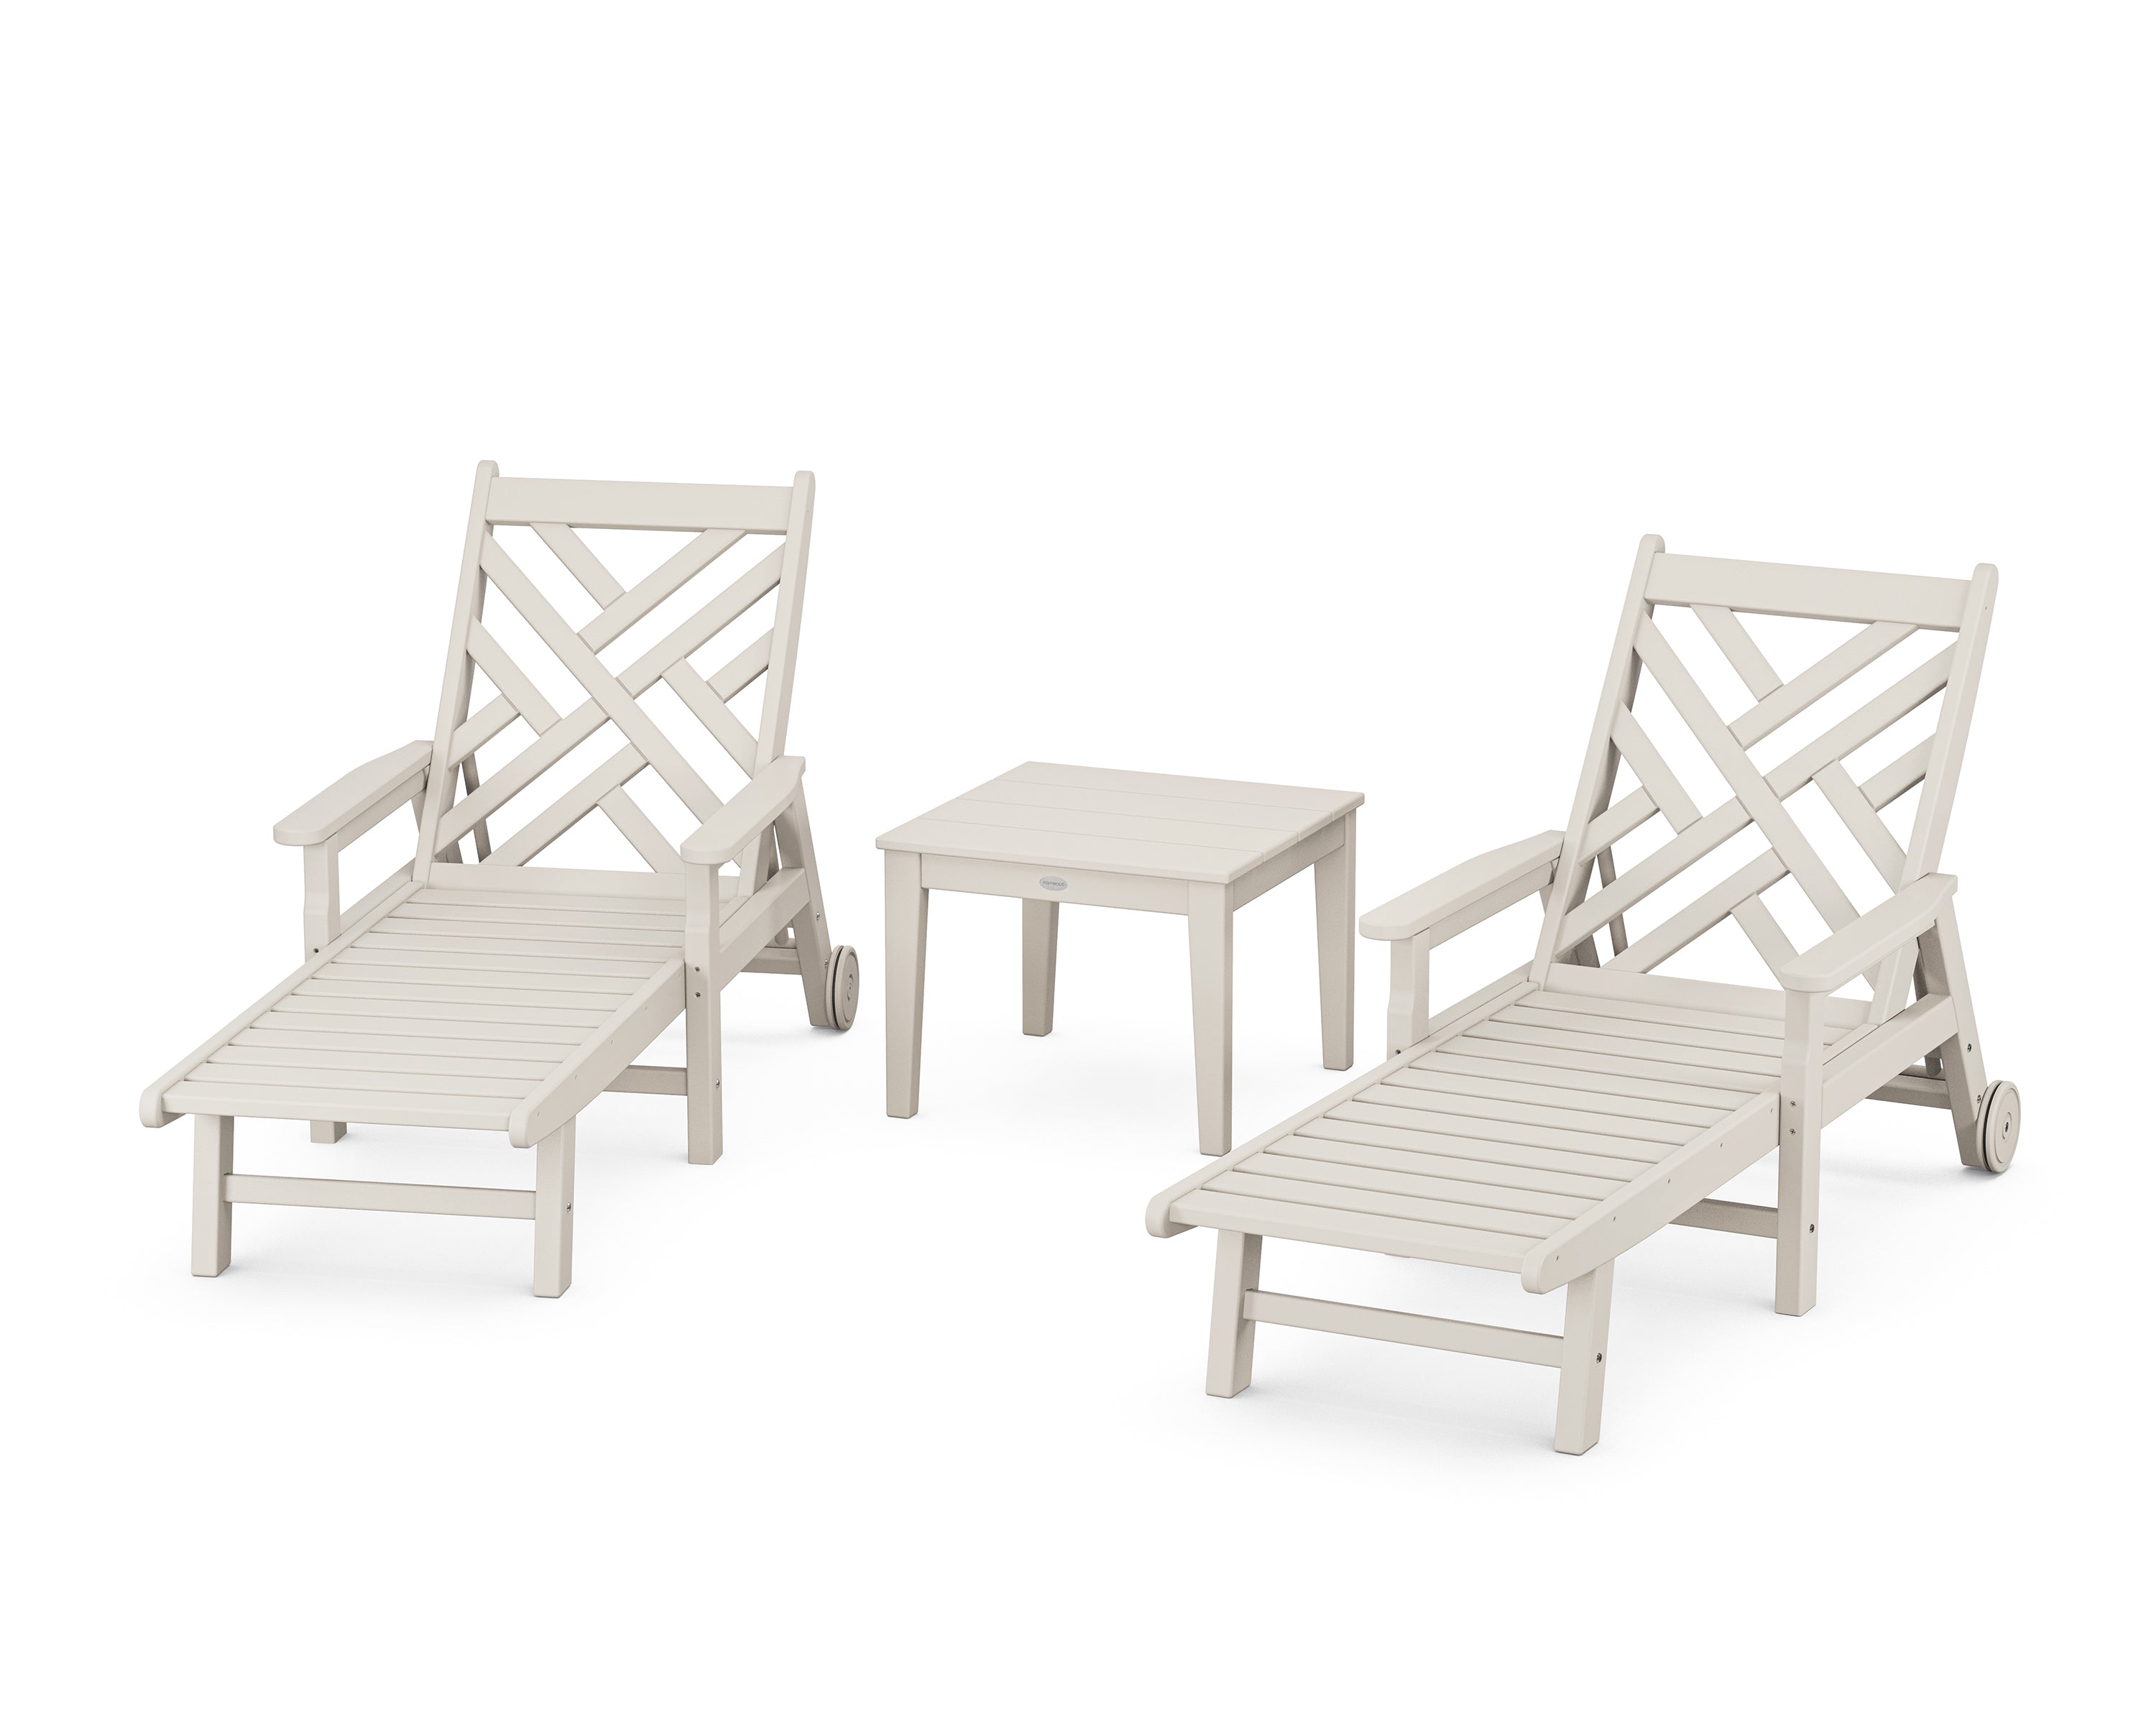 POLYWOOD Chippendale 3-Piece Chaise Set with Arms and Wheels in Sand